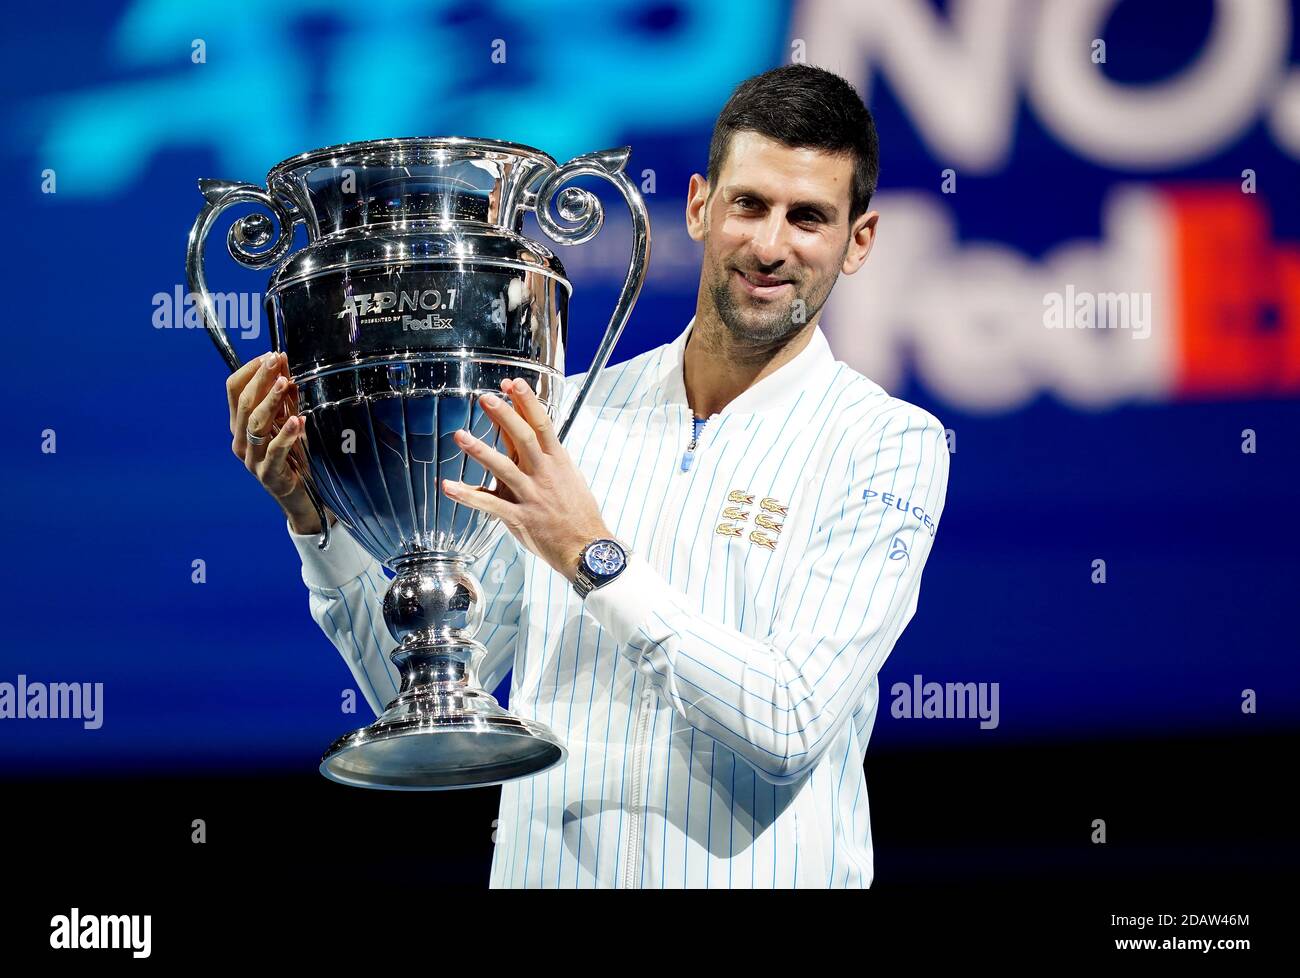 18 Wta Tennis Live Ranking Images, Stock Photos, 3D objects, & Vectors